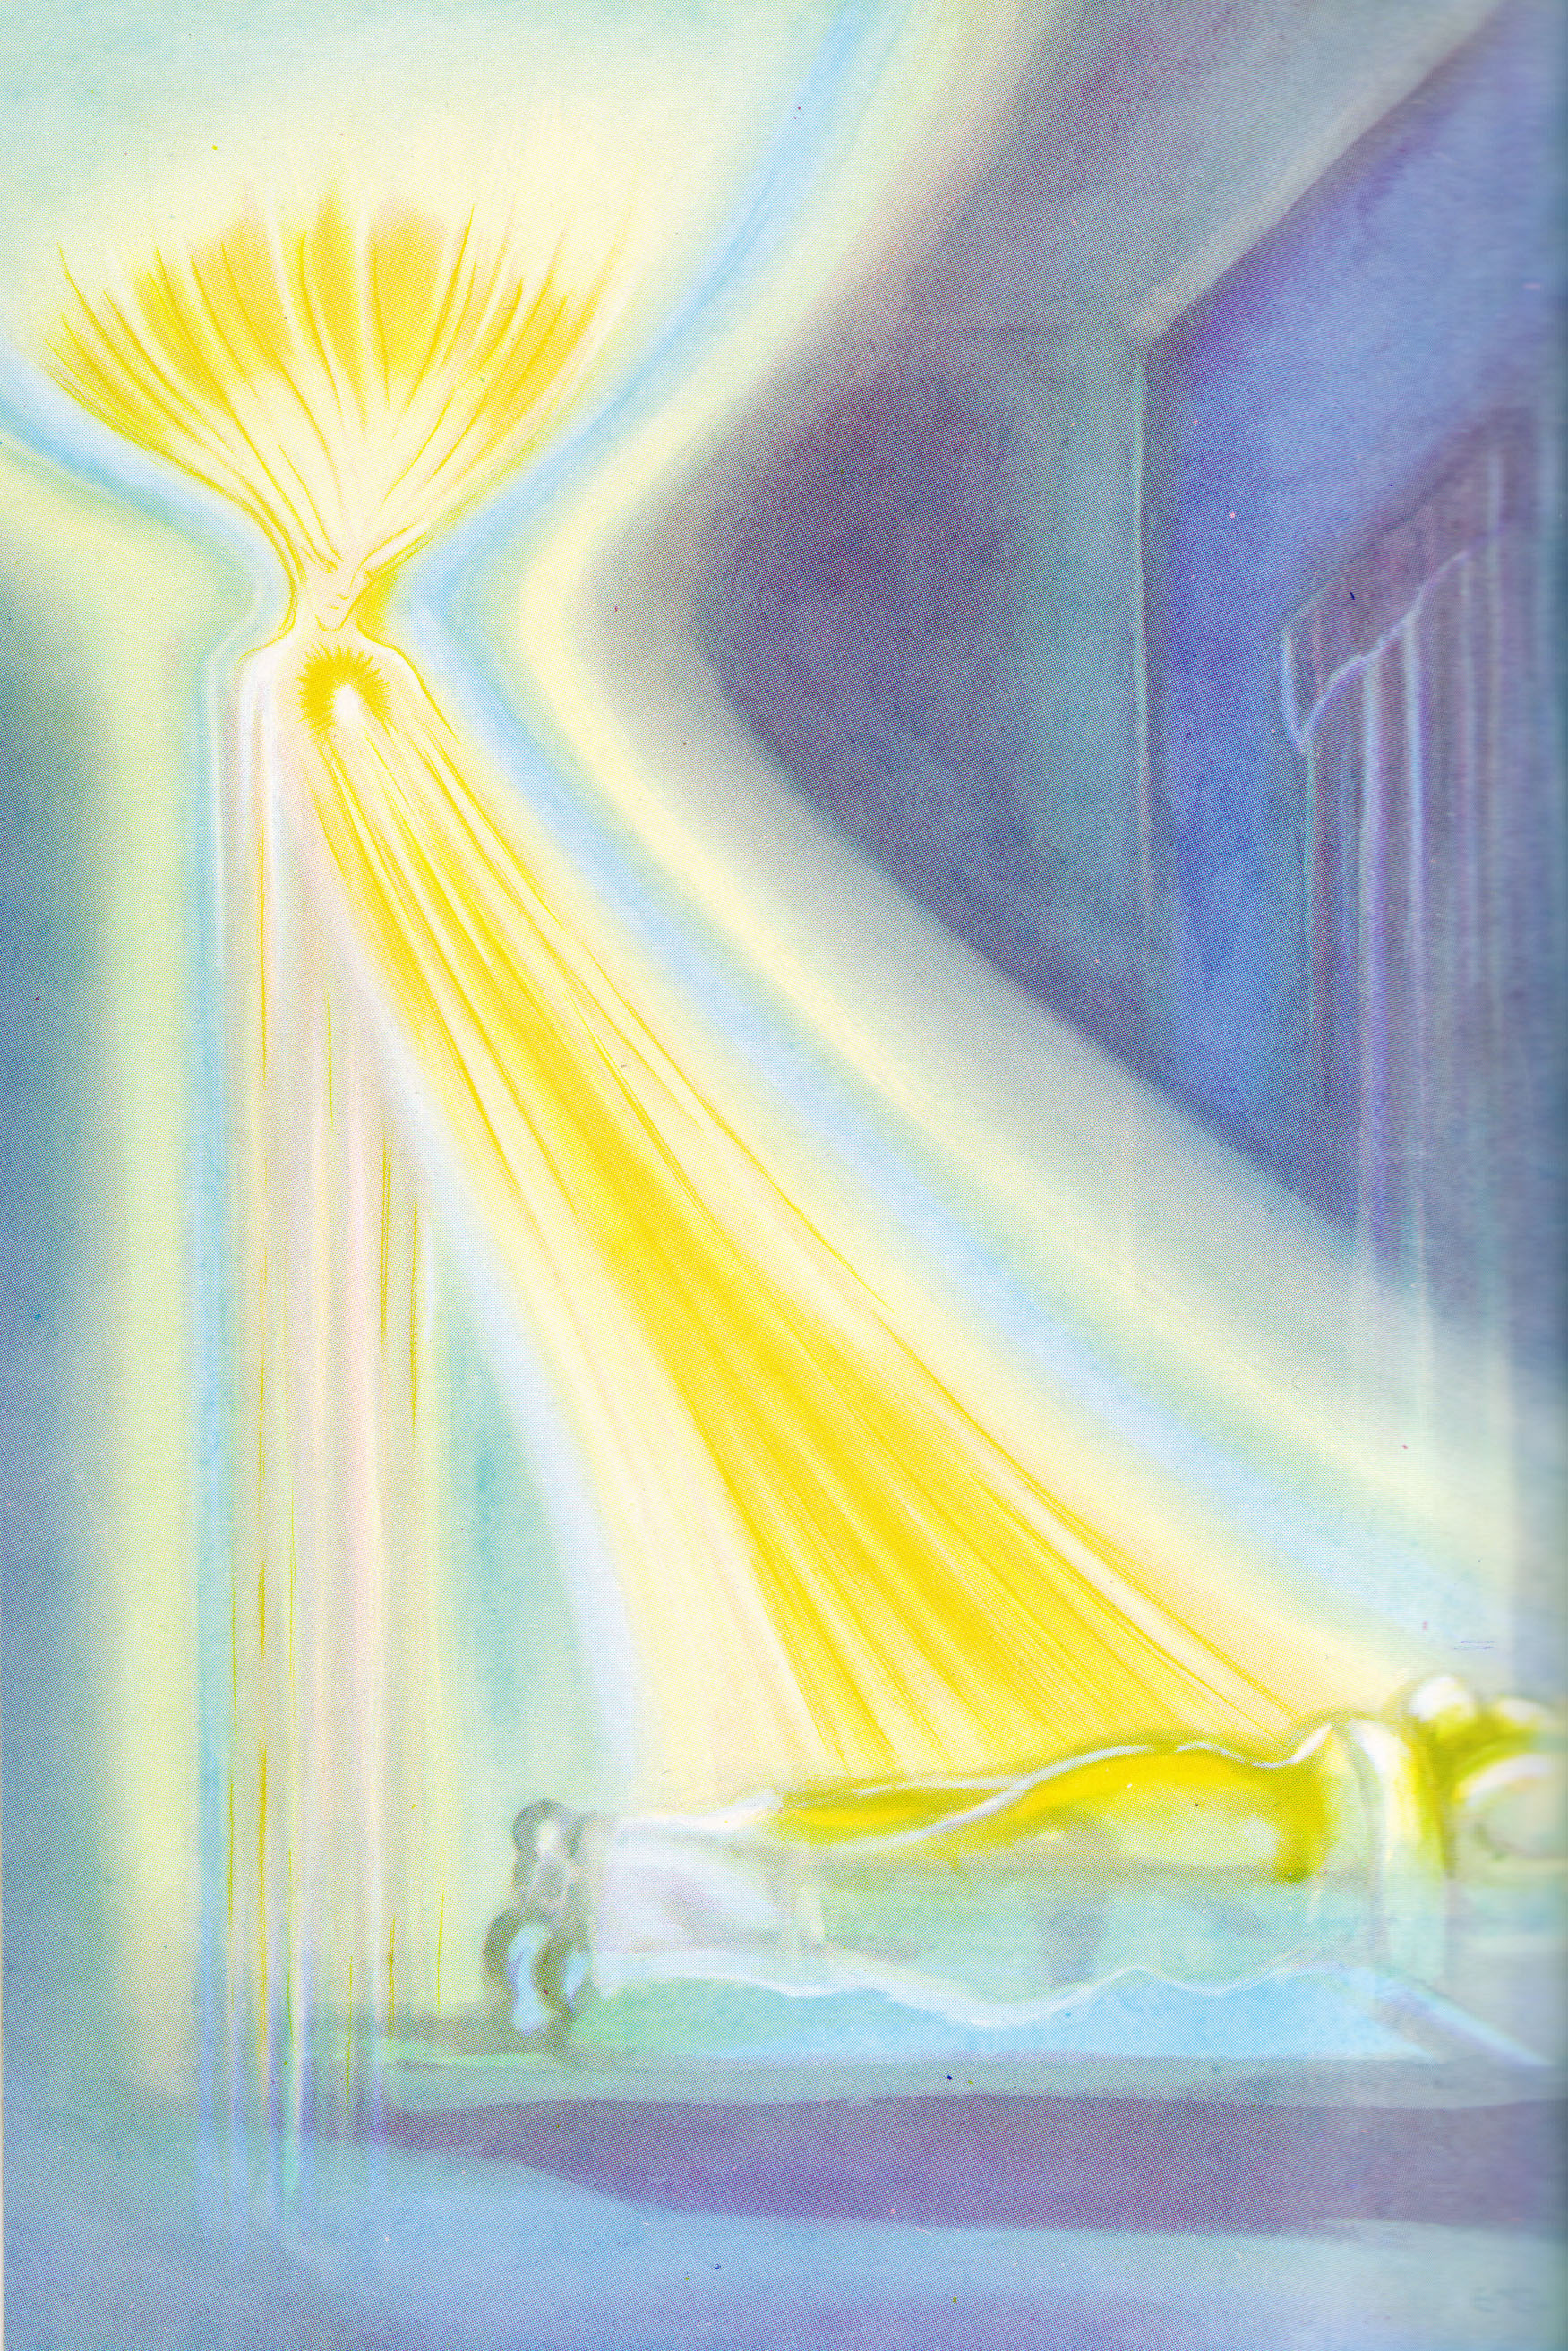 Illustration of a Healing Angel as described by Geoffrey Hodson